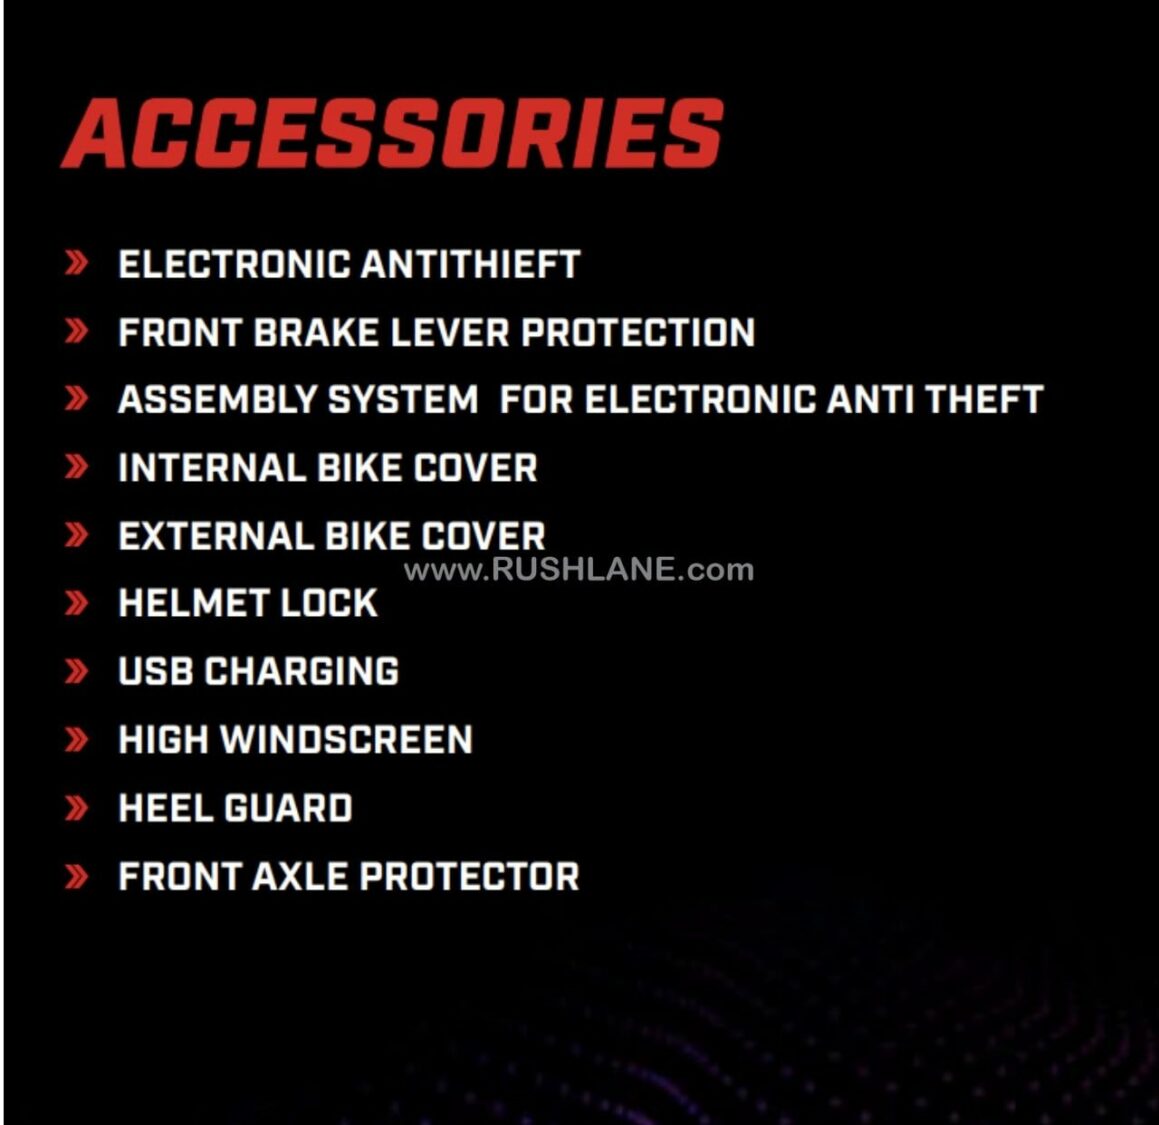 Aprilia RS 457 Accessories listed on official brochure